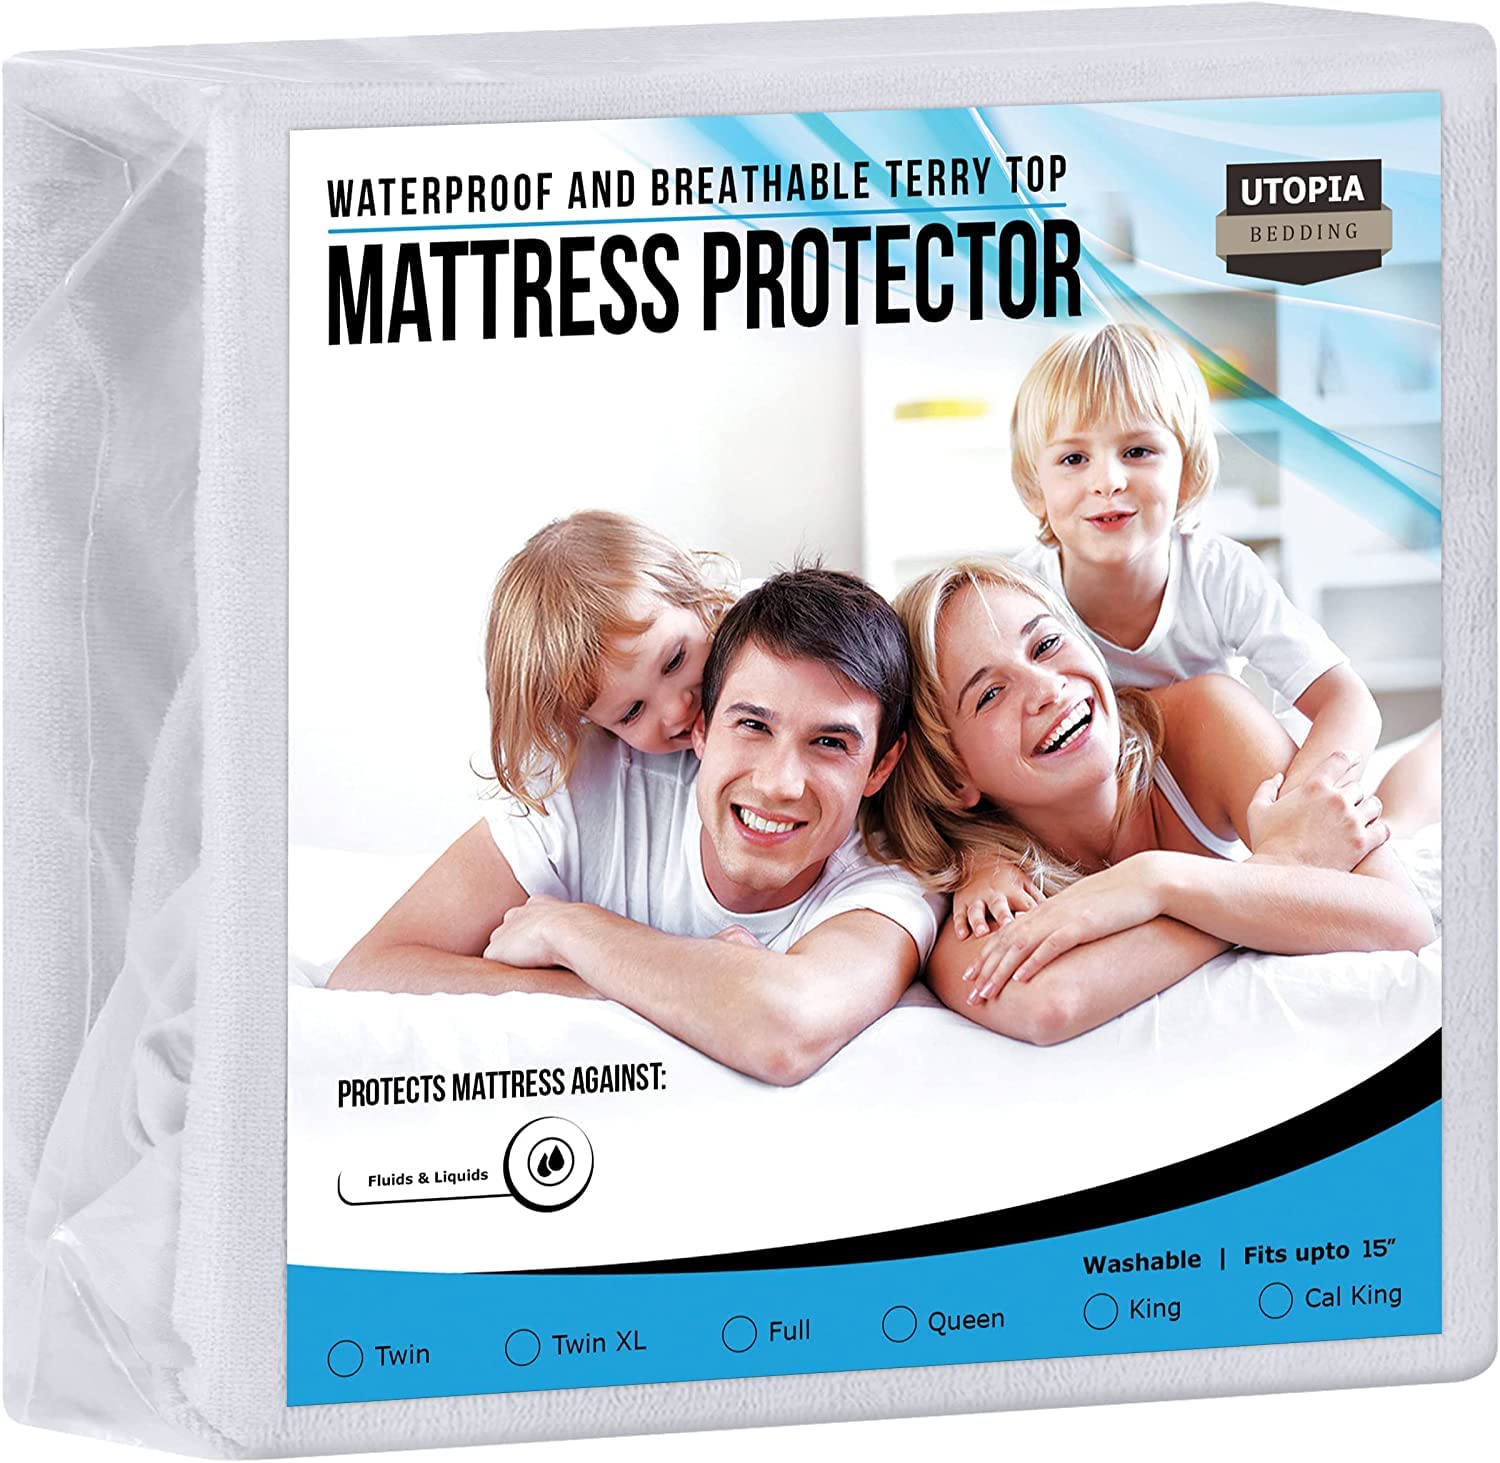 Book Cover Utopia Bedding Premium Waterproof Terry Mattress Protector Twin XL 200 GSM, Mattress Cover, Breathable, Fitted Style with Stretchable Pockets (White) White Twin XL